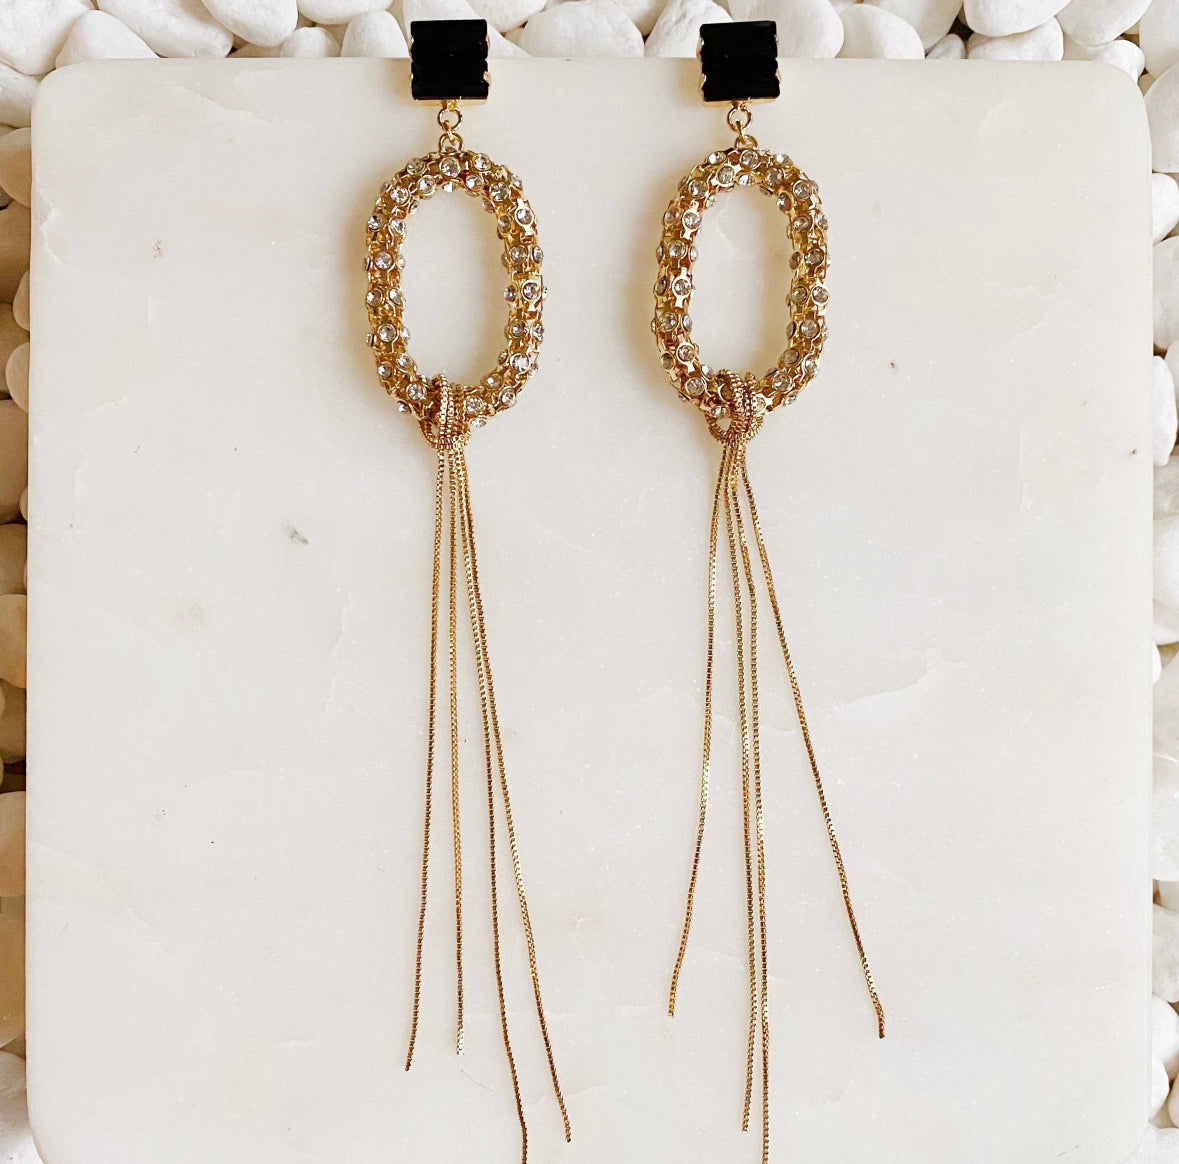 Make a Statement Earring